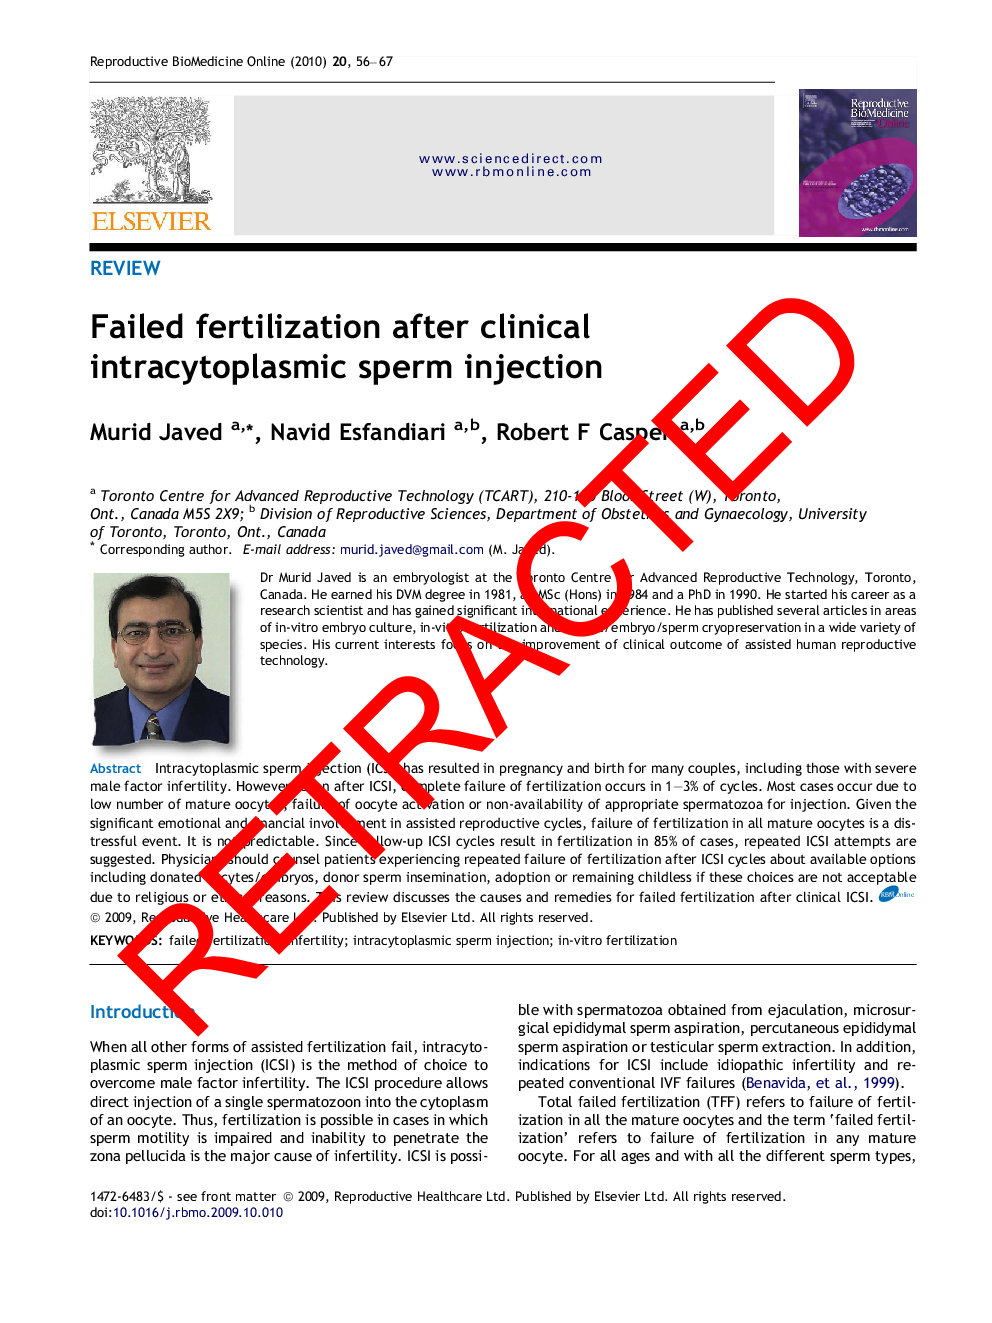 RETRACTED: Failed fertilization after clinical intracytoplasmic sperm injection